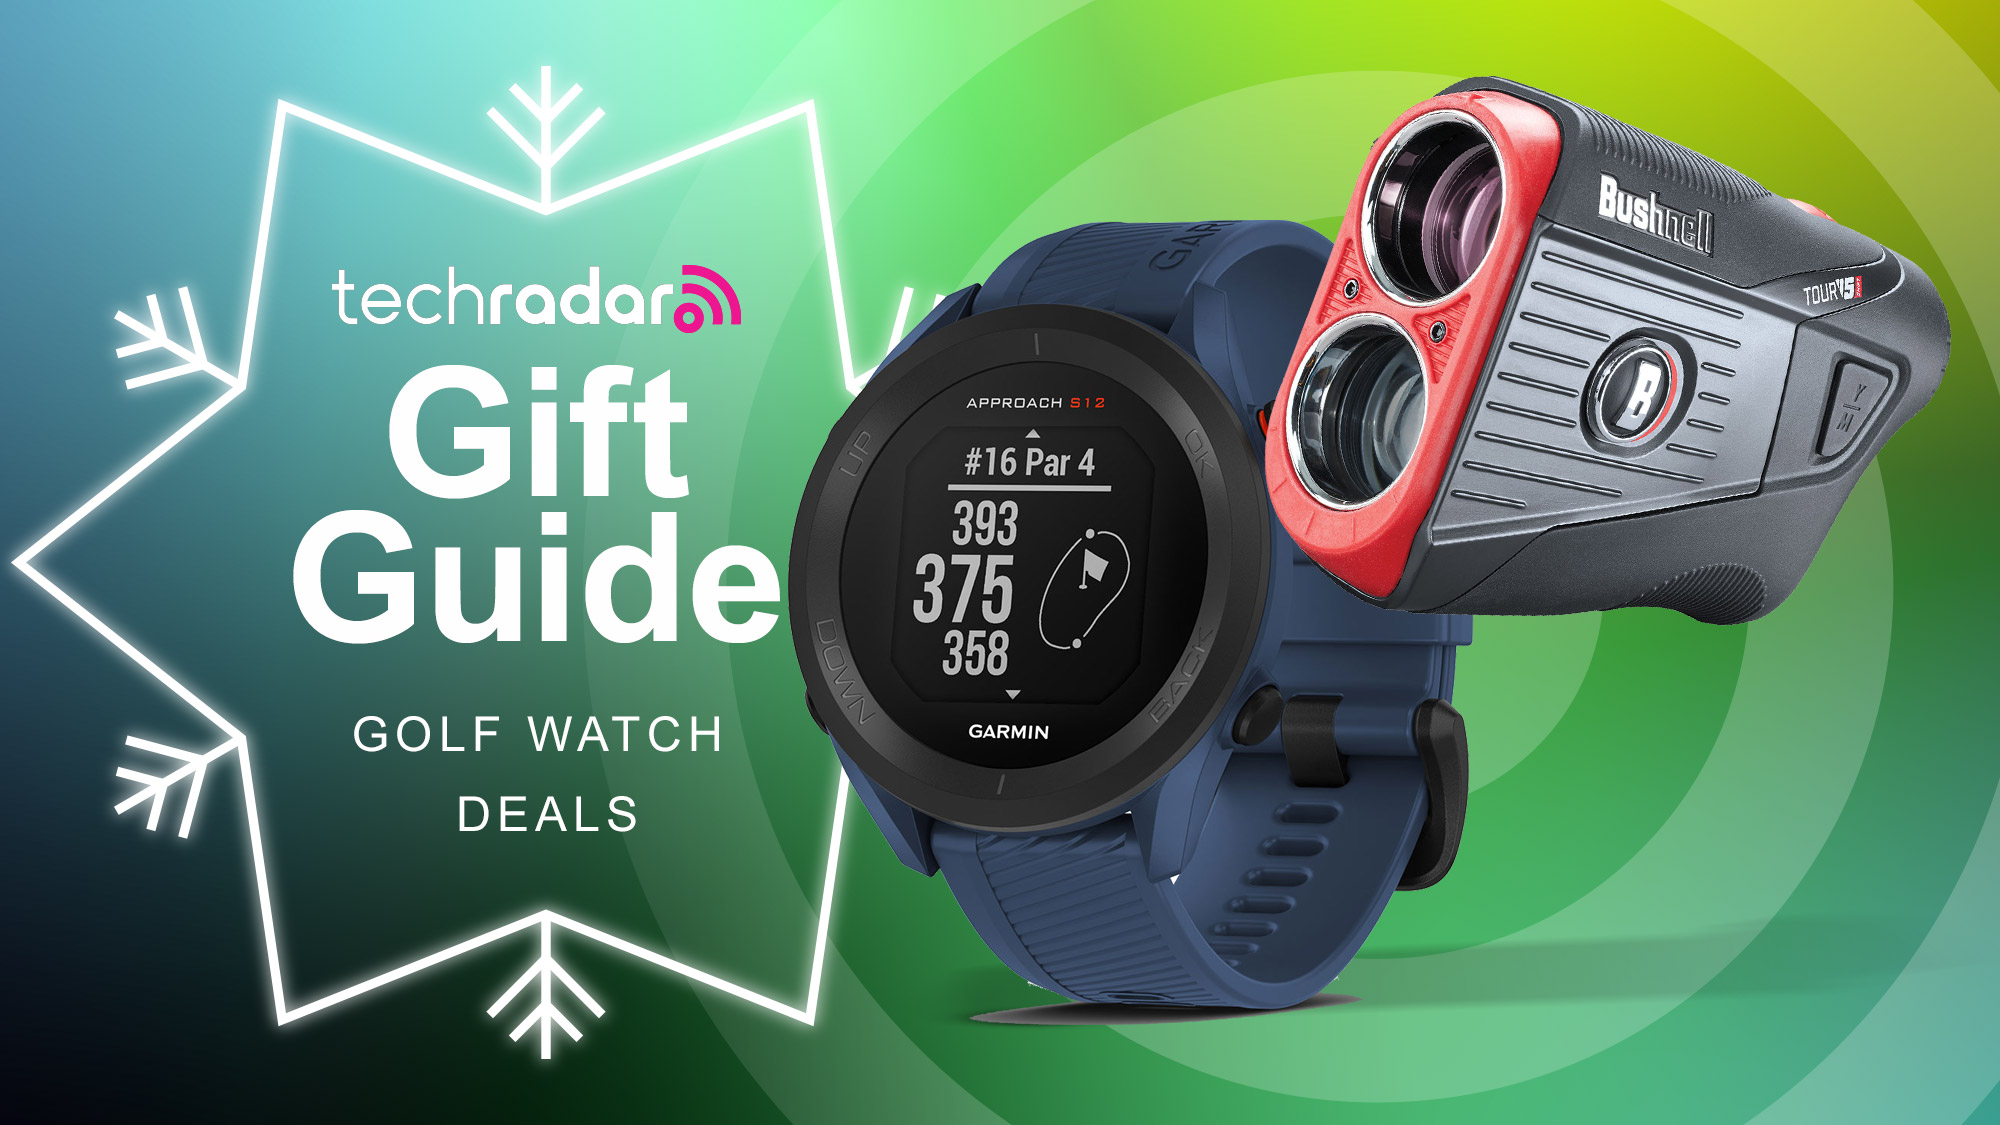 6 golf watch gifts for the season of giving | TechRadar